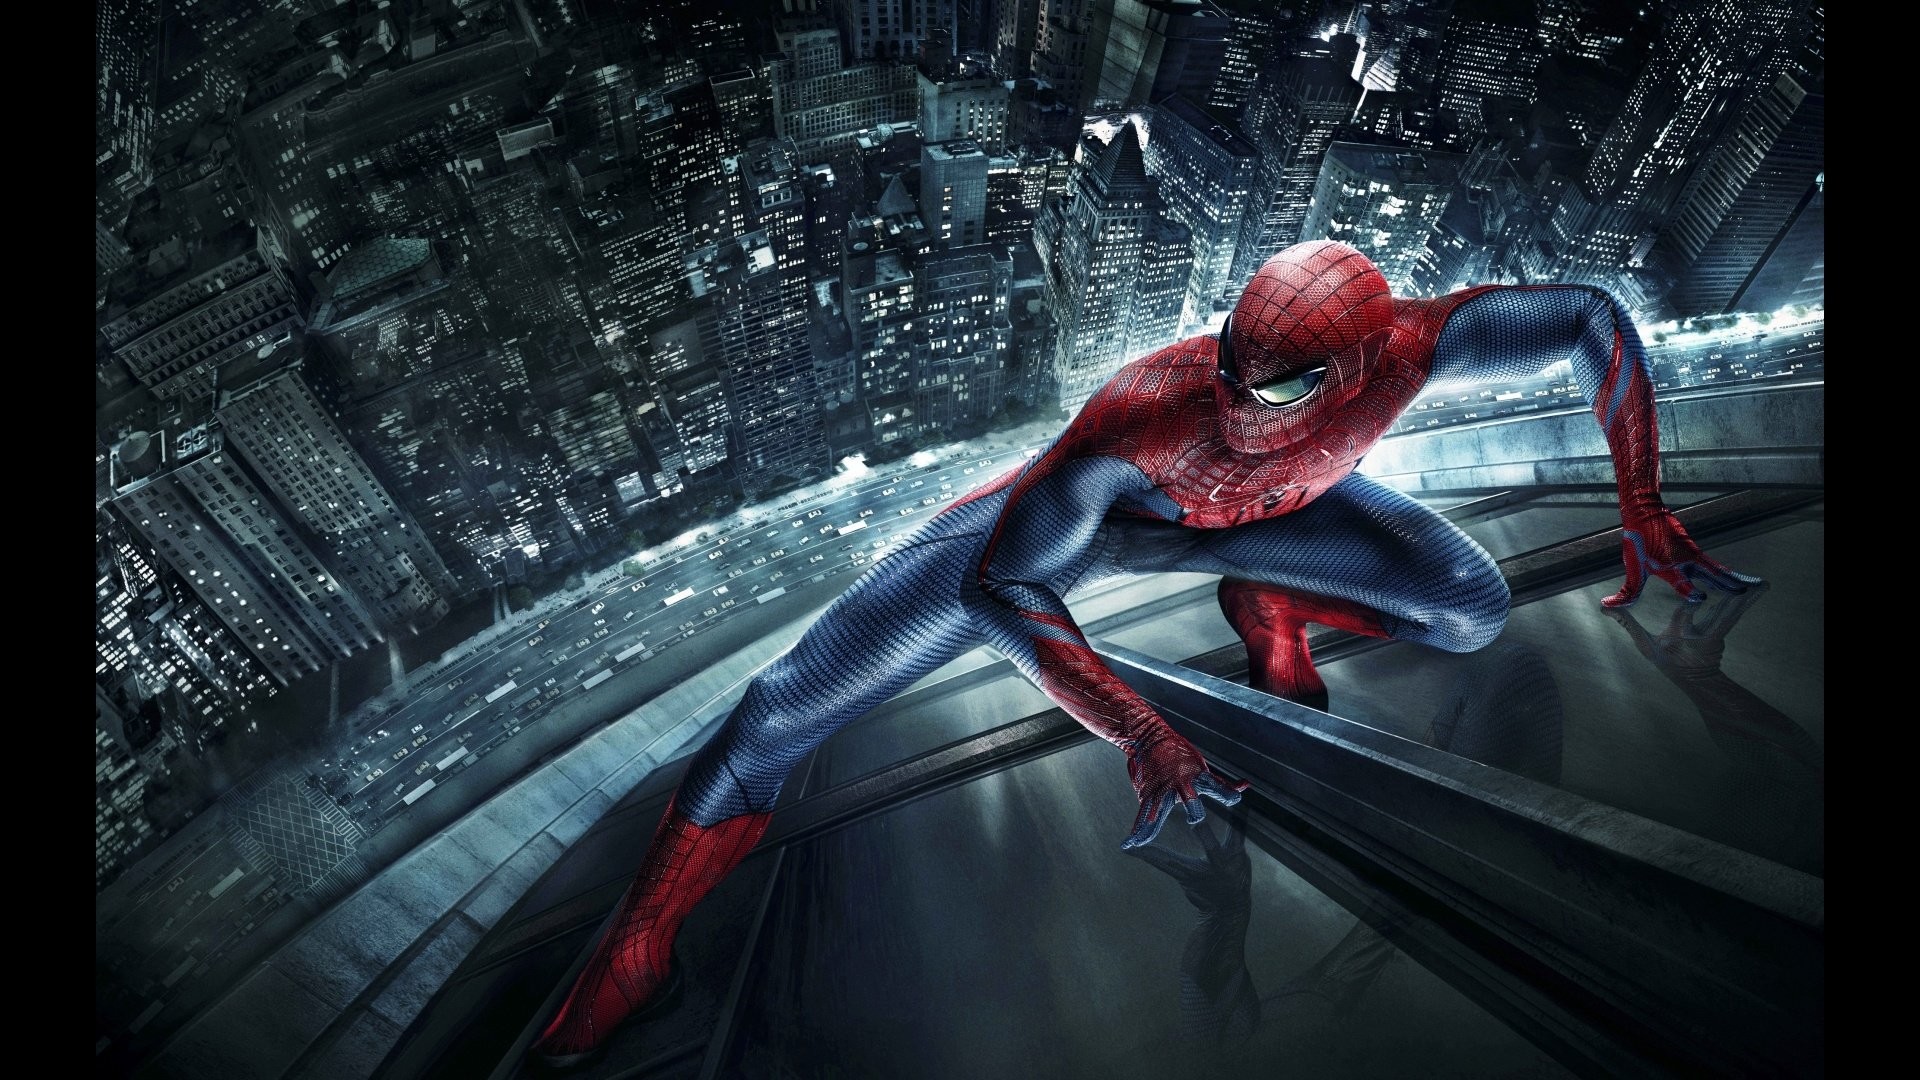 1920x1080 The Amazing Spider Man HD Wallpapers Group Ã The Amazing | HD Wallpapers |  Pinterest | Amazing spider and Wallpaper